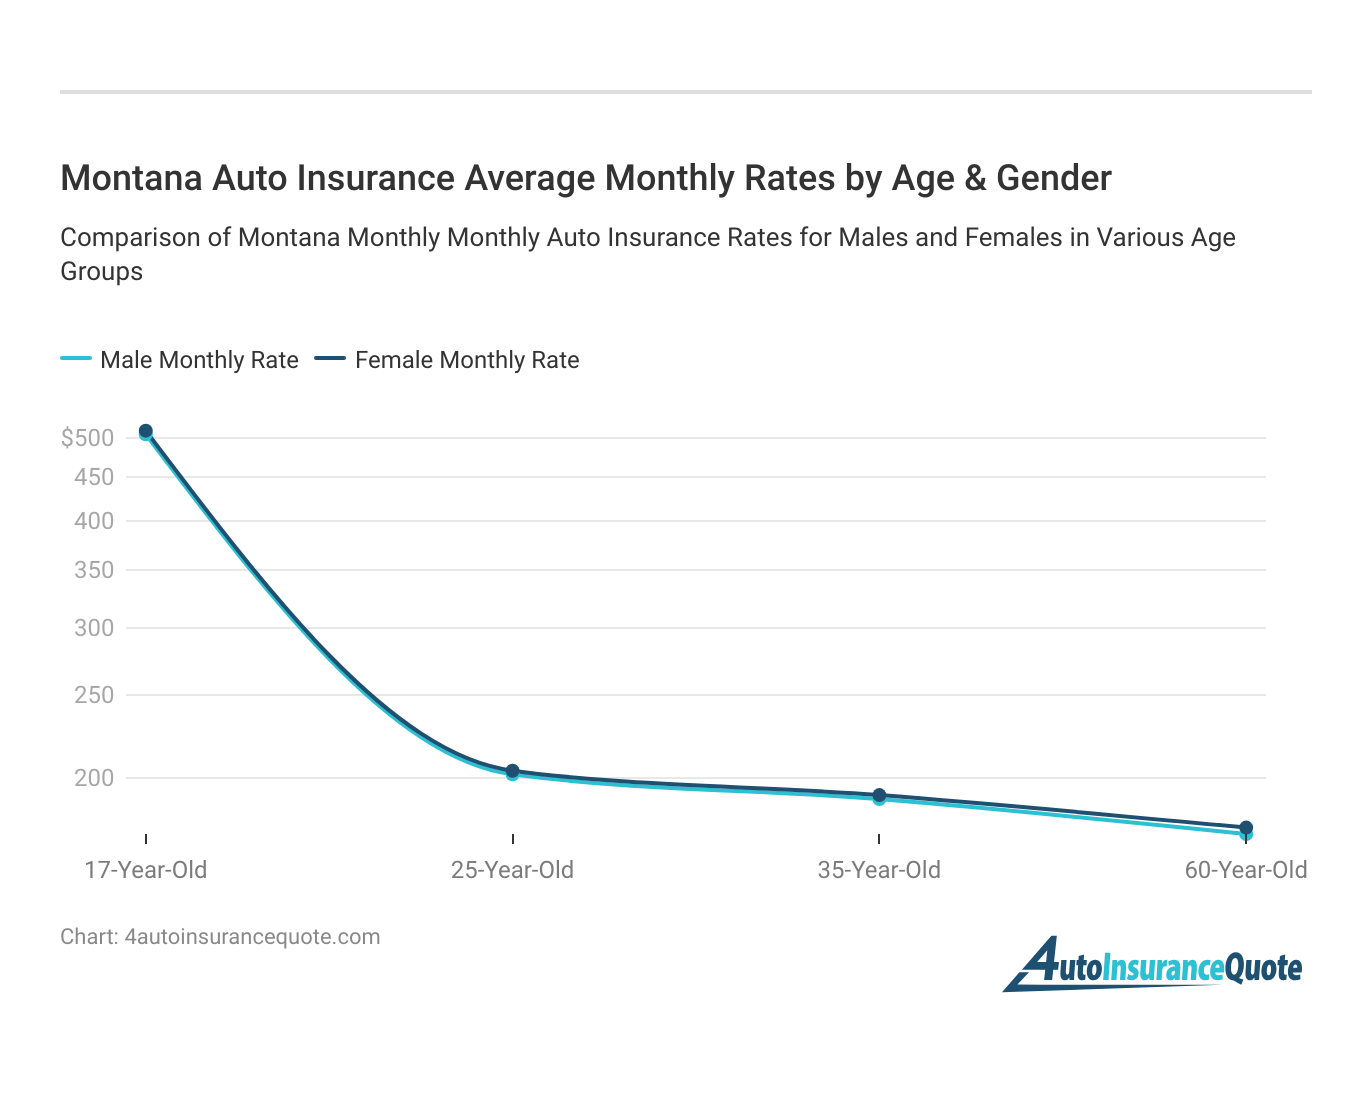 <h3>Montana Auto Insurance Average Monthly Rates by Age & Gender</h3>